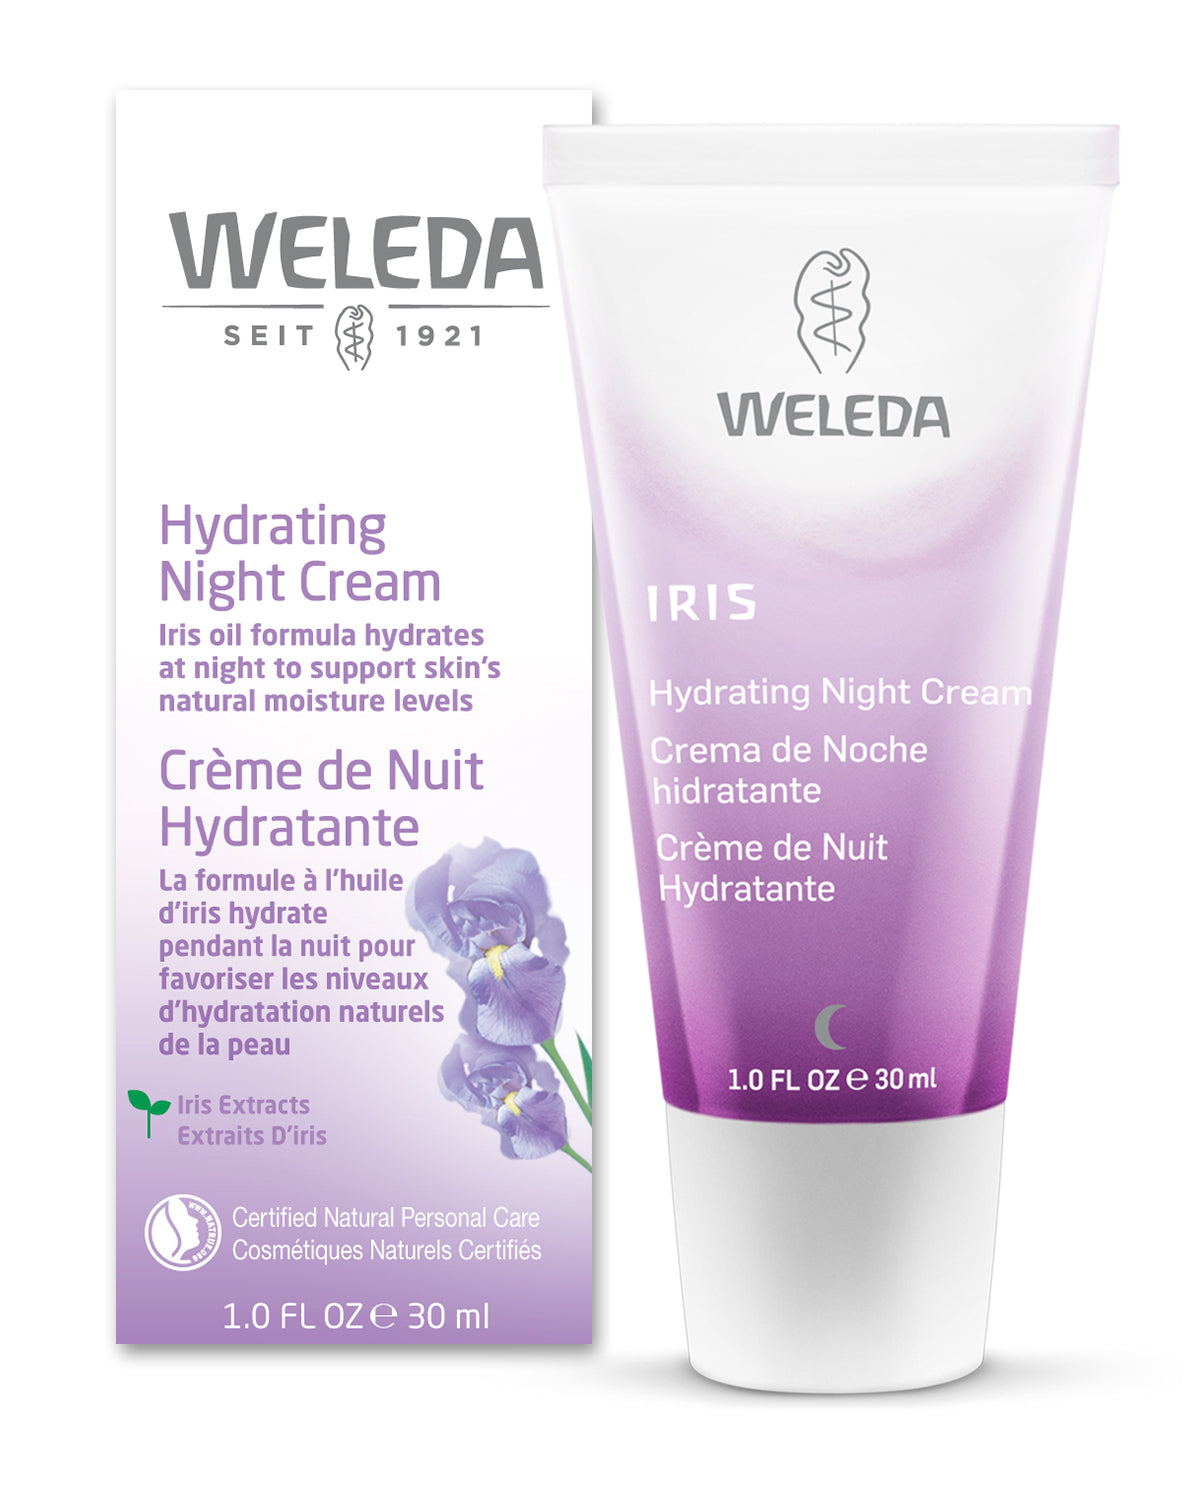 Hydrating Facial Lotion – Parapharmacy Store